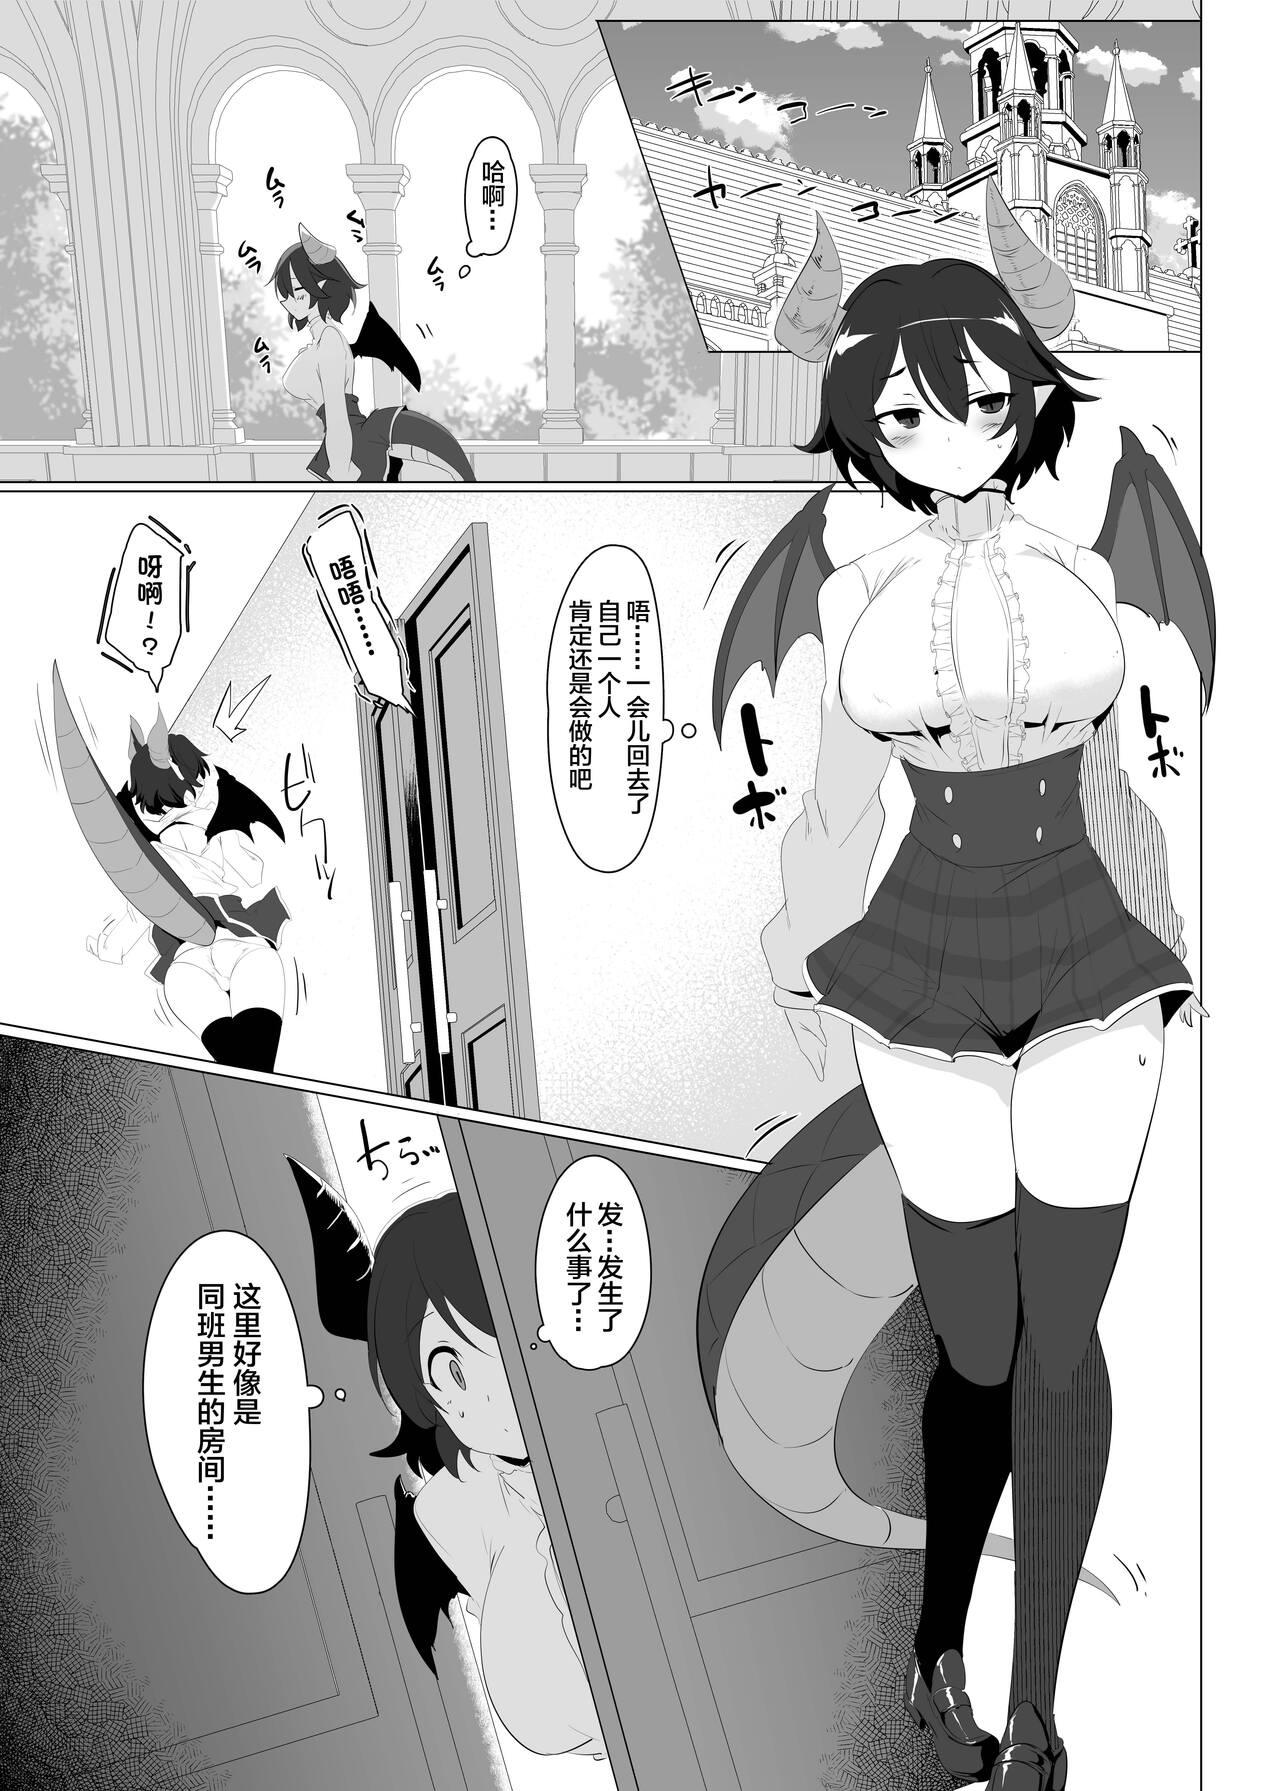 Oral There's No Way An Ecchi Event Will Happen Between the Dragon Princess of Manaria Academy and Me, A Regular Student! - Manaria friends Mamadas - Page 4